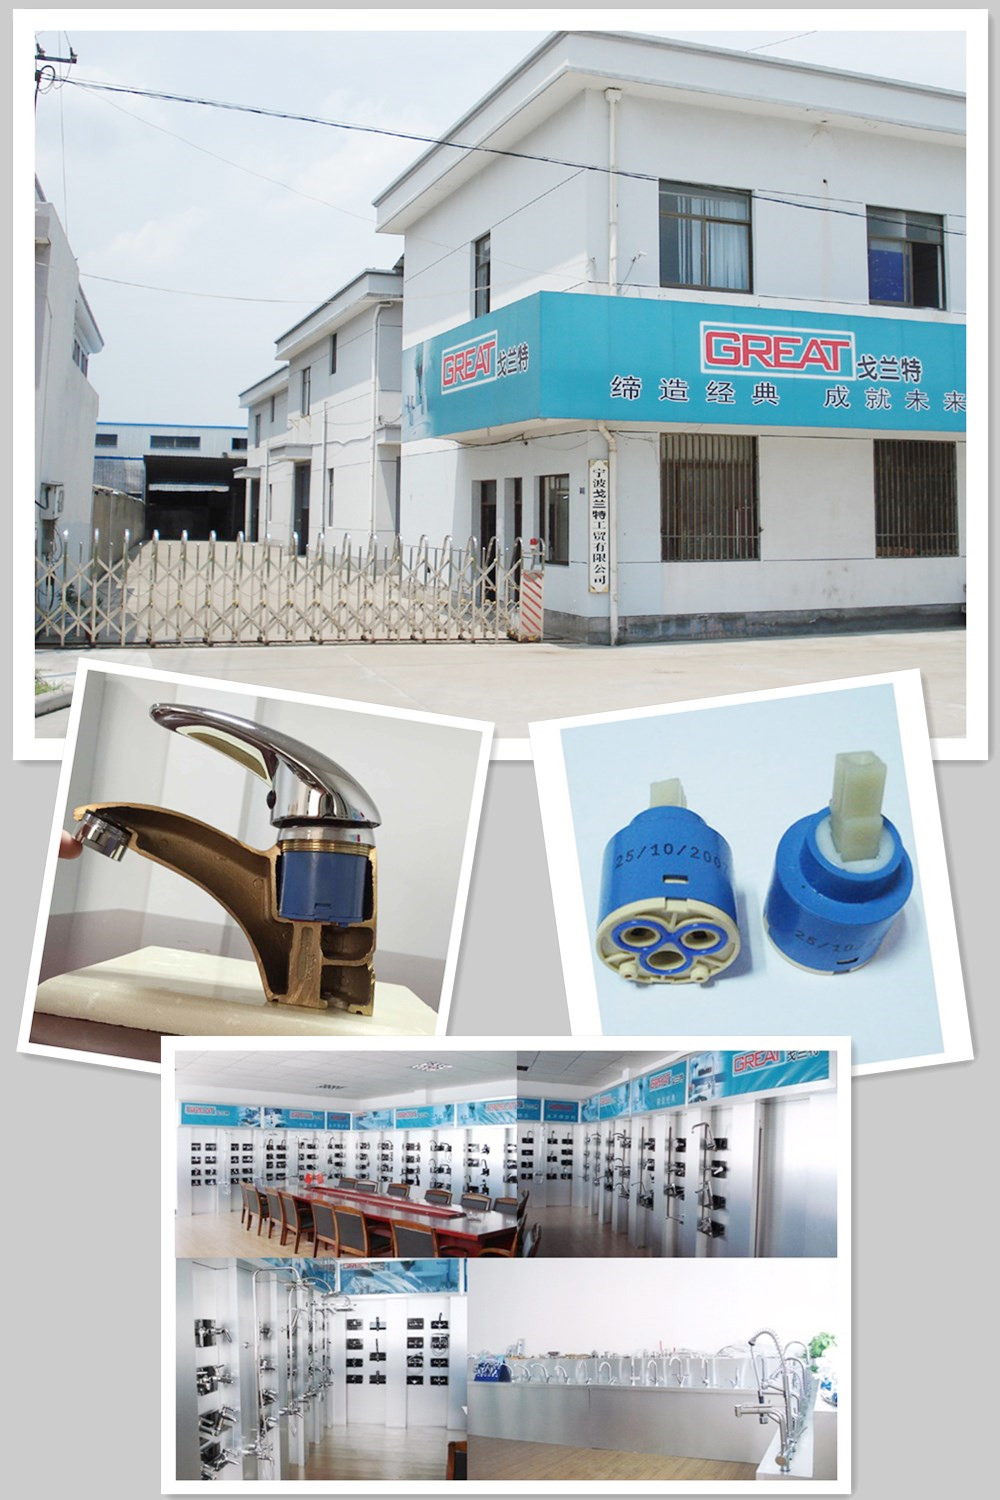 Chinese Manufacturer of Bathroom Shower Faucet